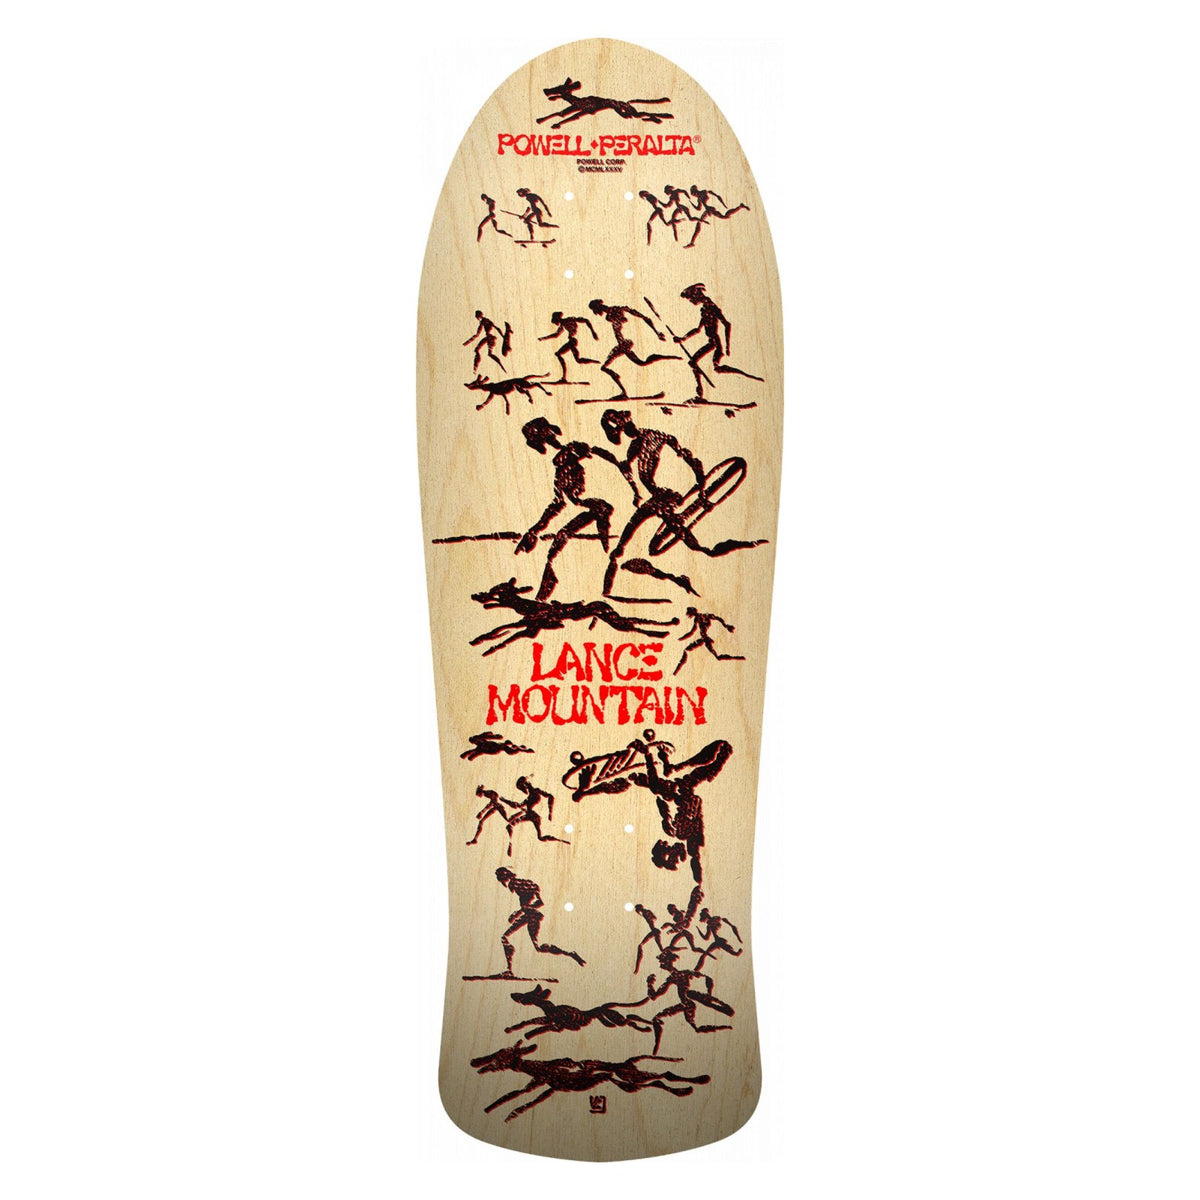 Powell-Peralta Re-Issue Limited Edition Collector Skateboard Decks, Series 11, Lance Mountain